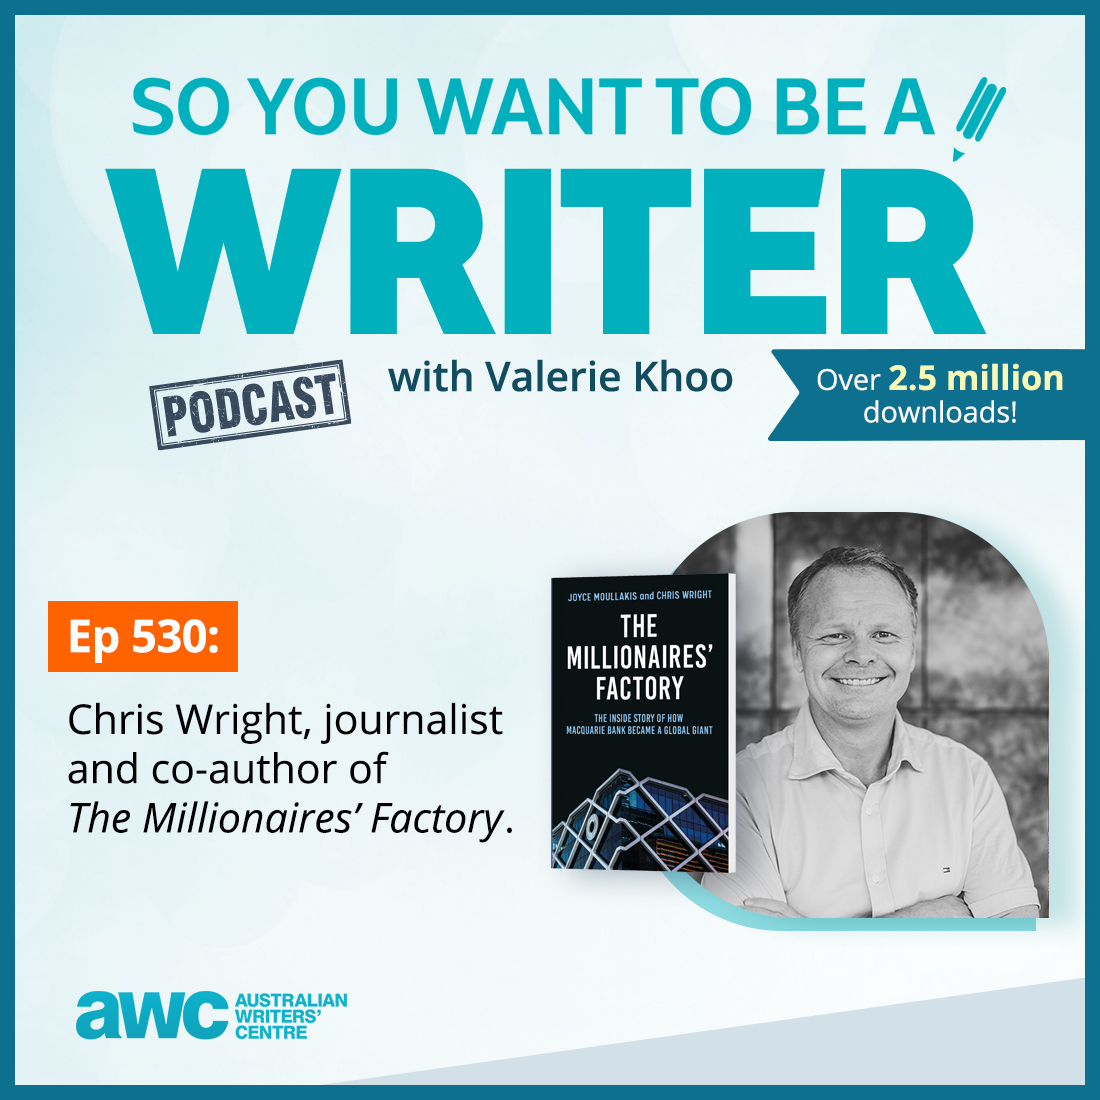 WRITER 530: Chris Wright, journalist and co-author of ‘The Millionaires’ Factory’.